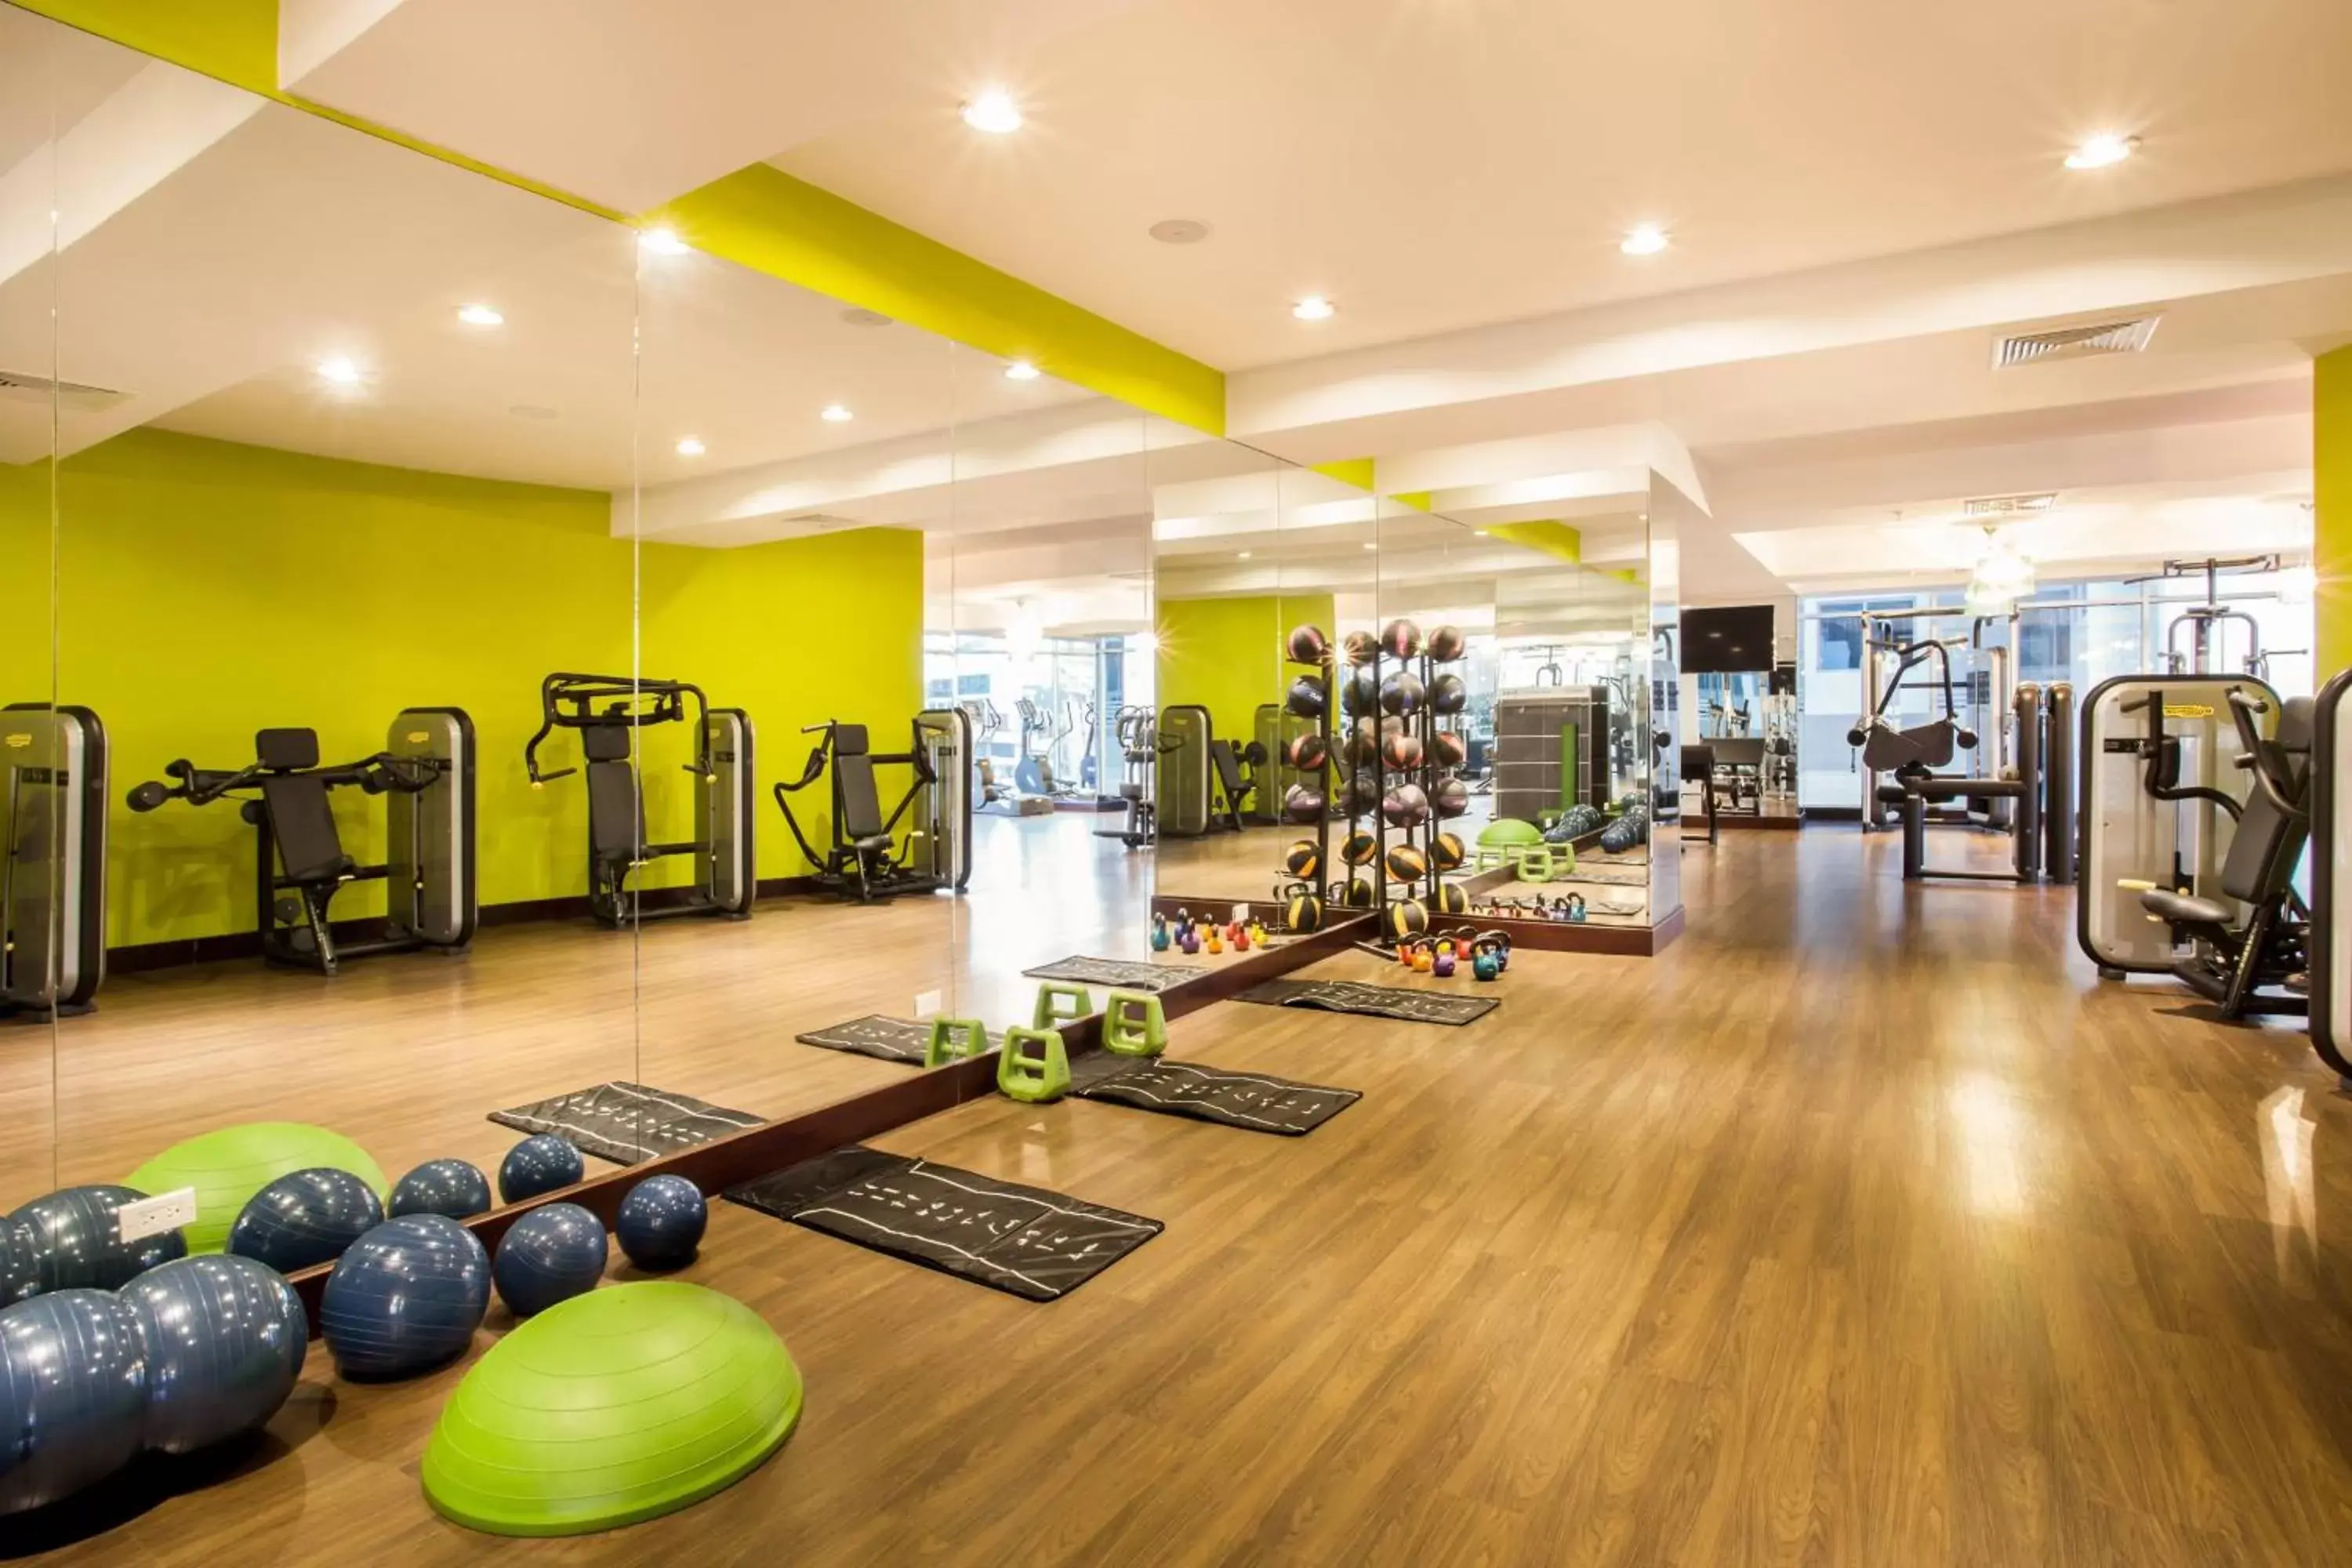 Fitness centre/facilities, Fitness Center/Facilities in Sortis Hotel, Spa & Casino, Autograph Collection